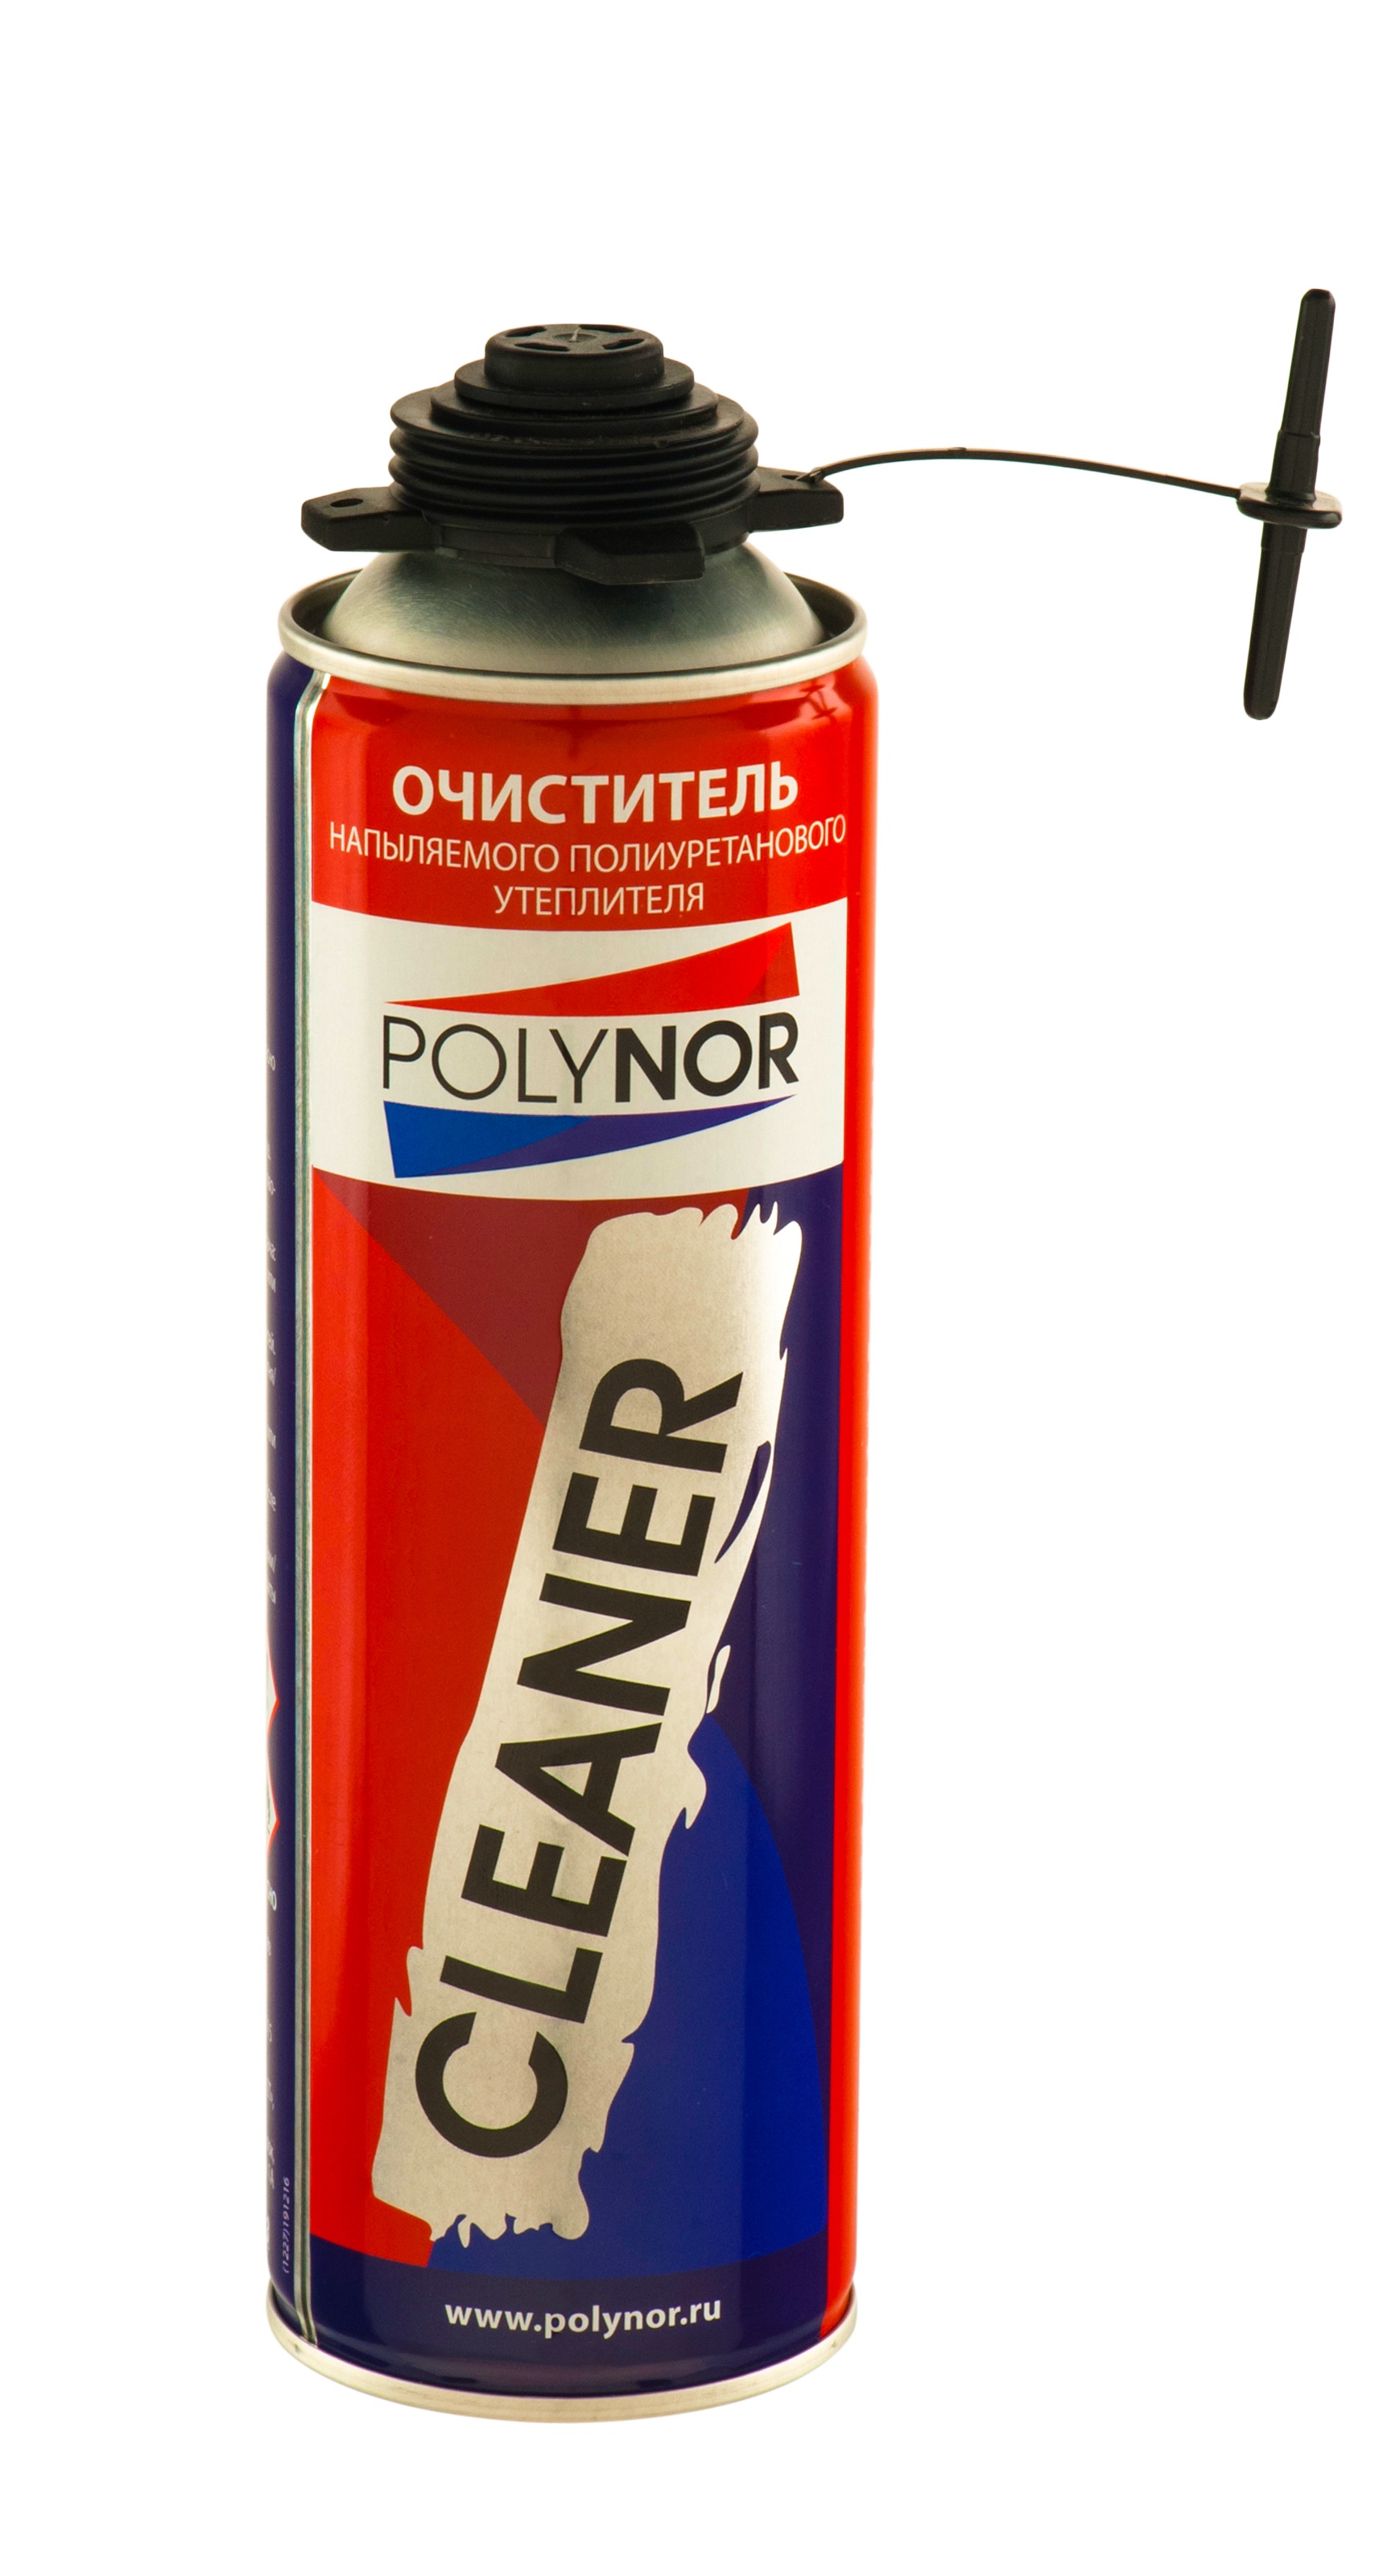 POLYNOR Cleaner